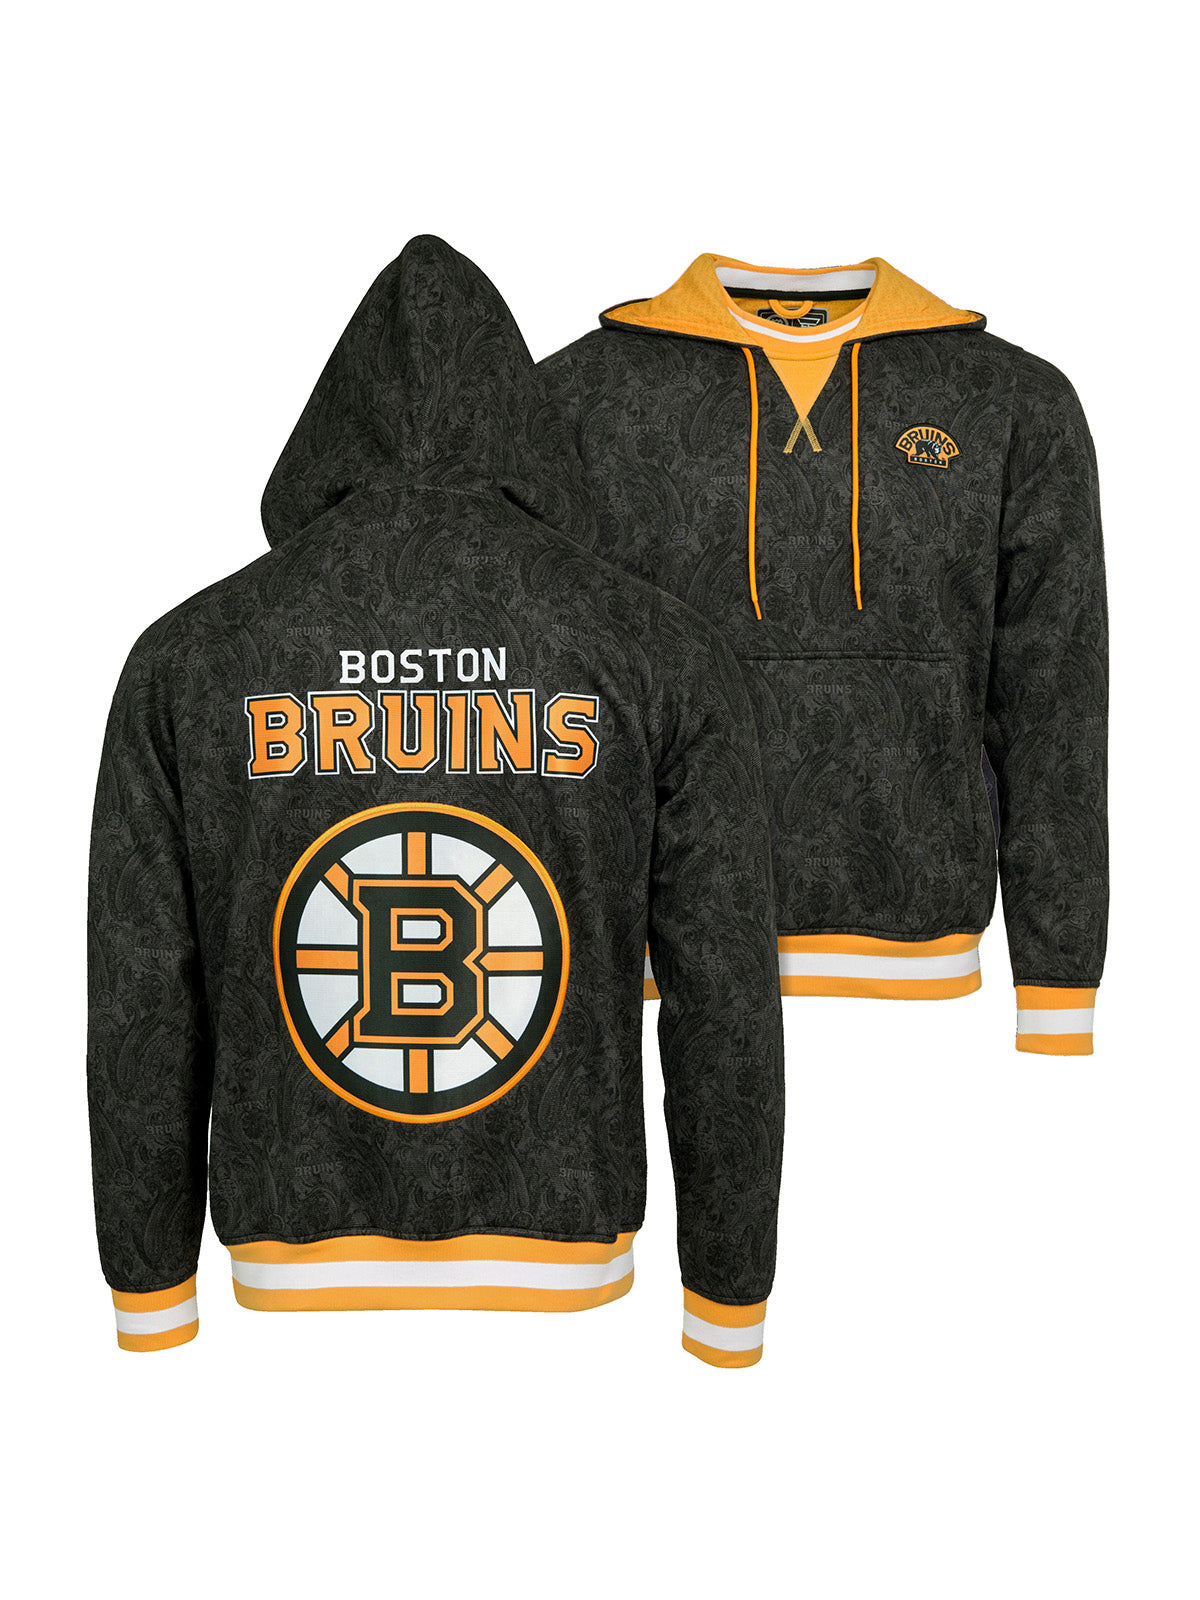 Boston Bruins Hoodie - Show your team spirit, with the iconic team logo patch on the front and back, and proudly display your Boston Bruins support in their team colors with this NHL hockey hoodie.